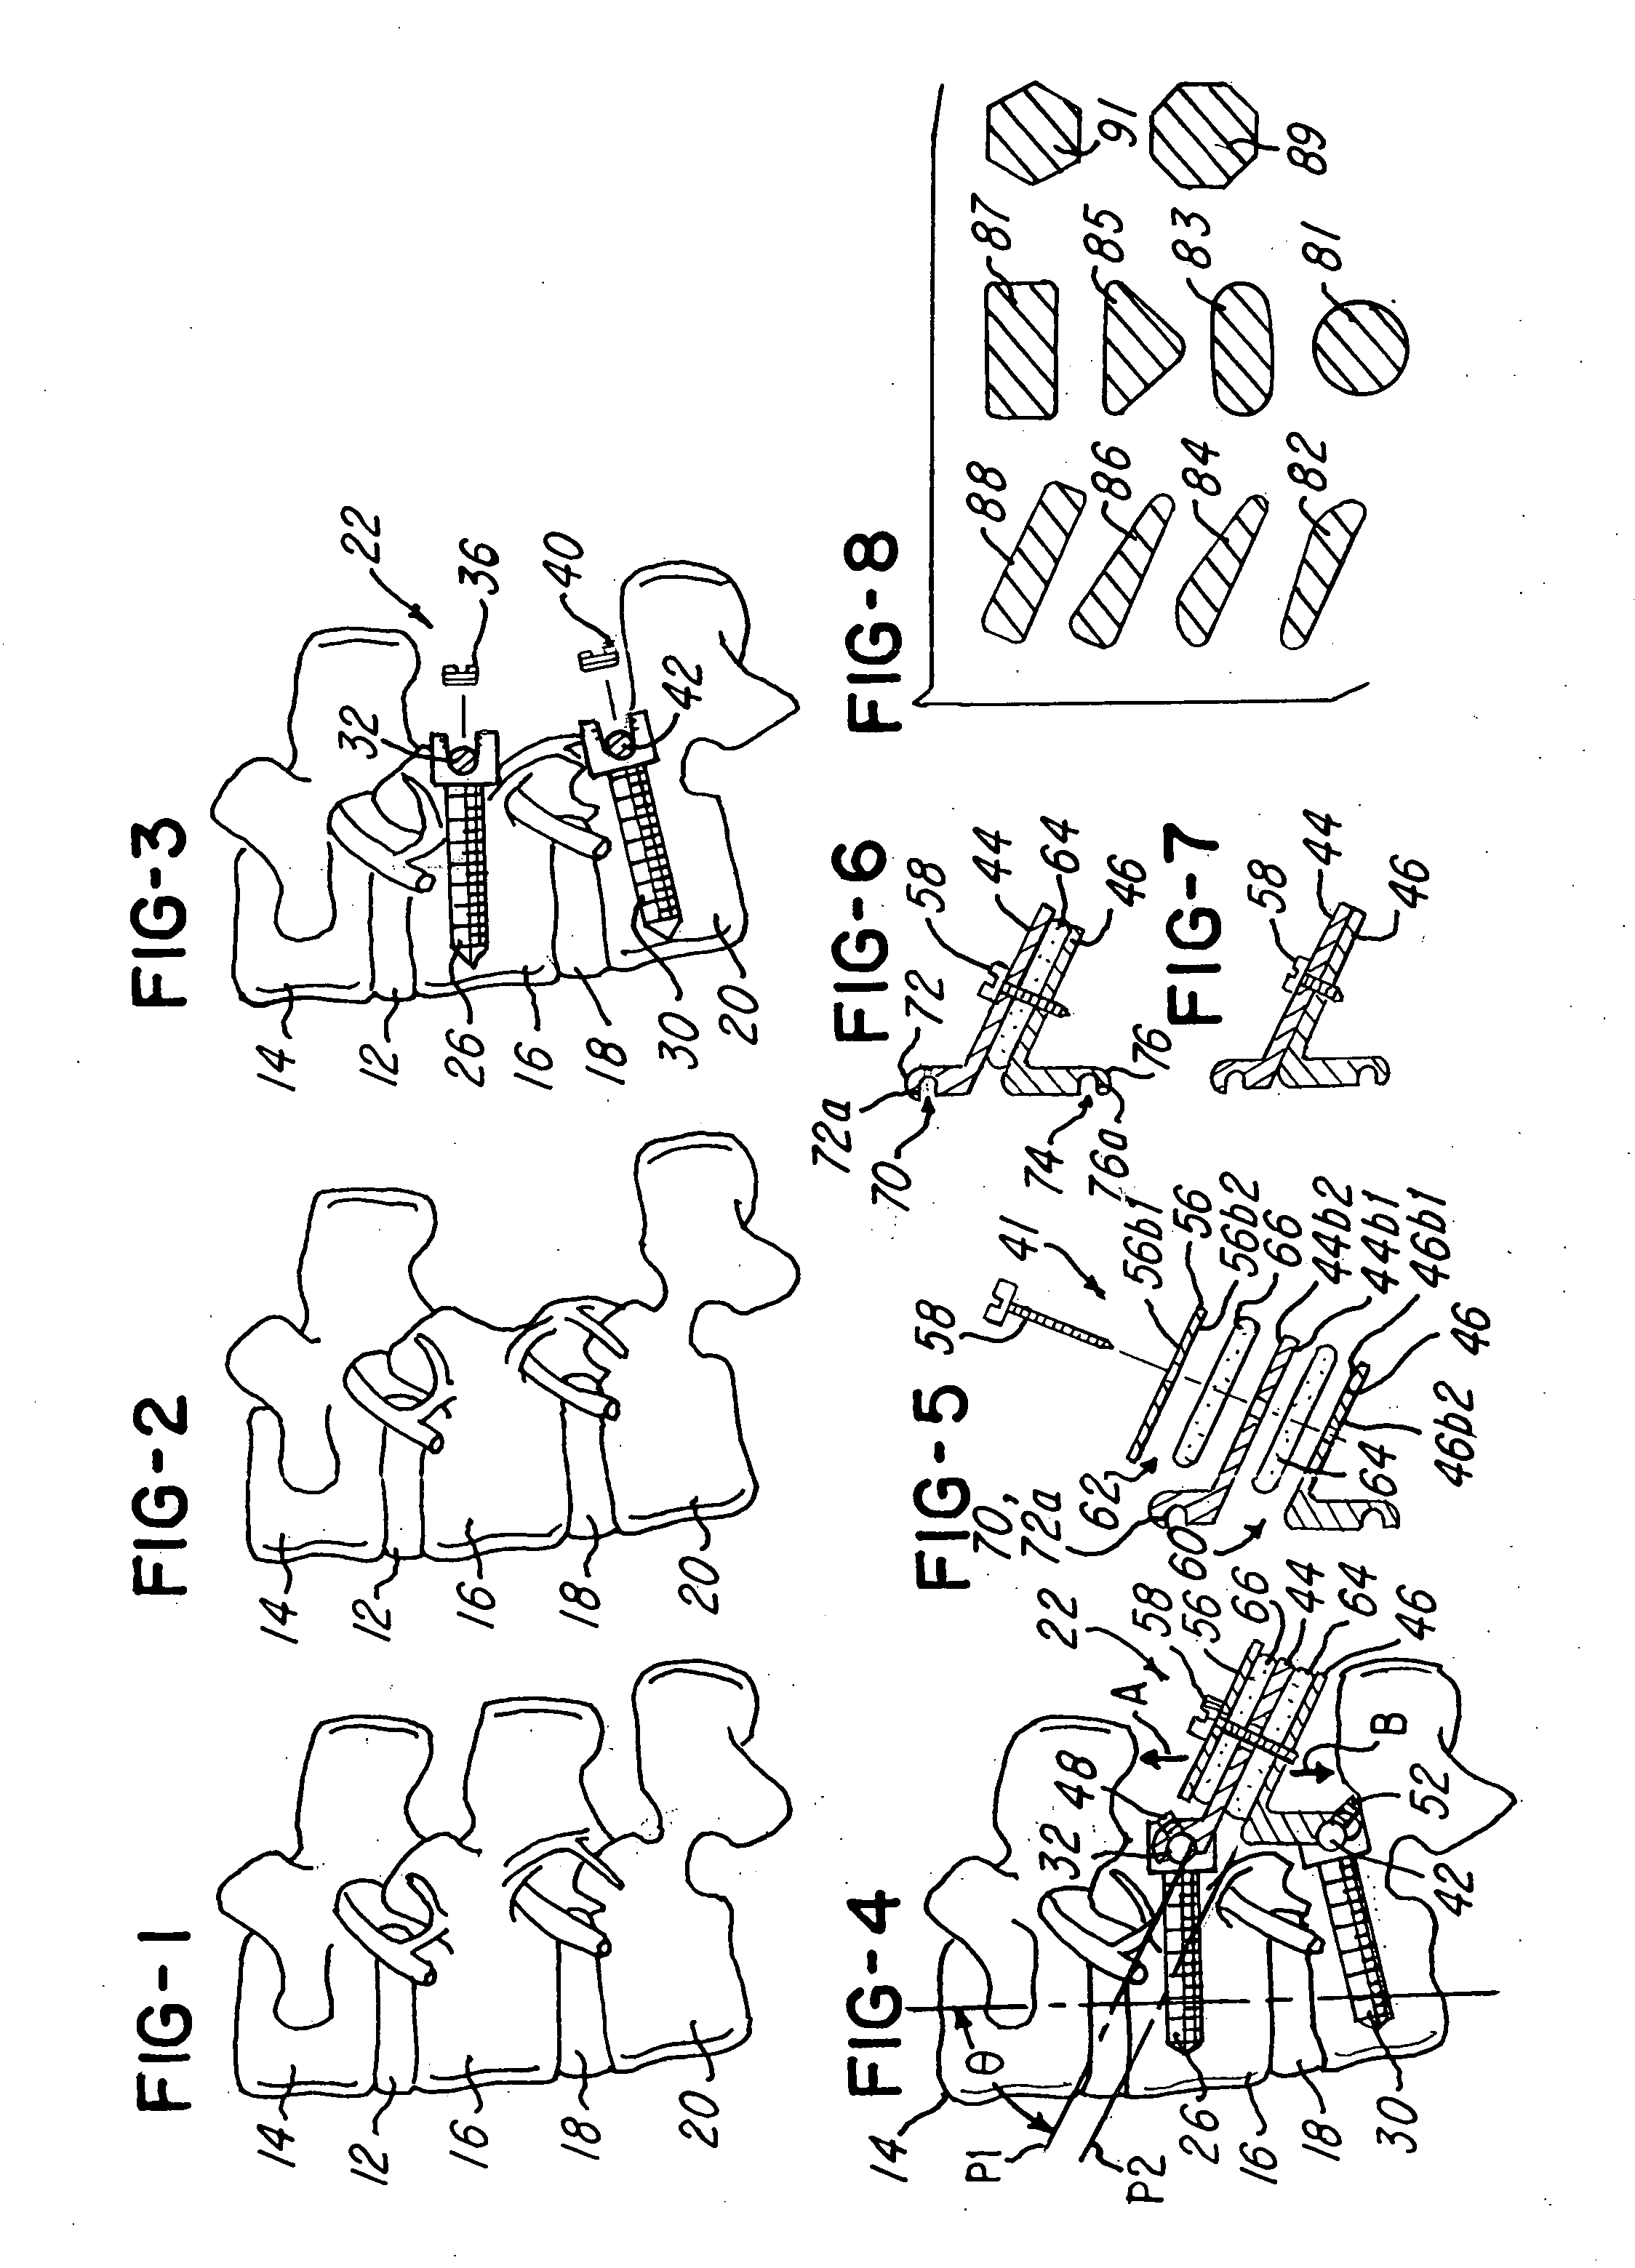 Disk augmentation system and method